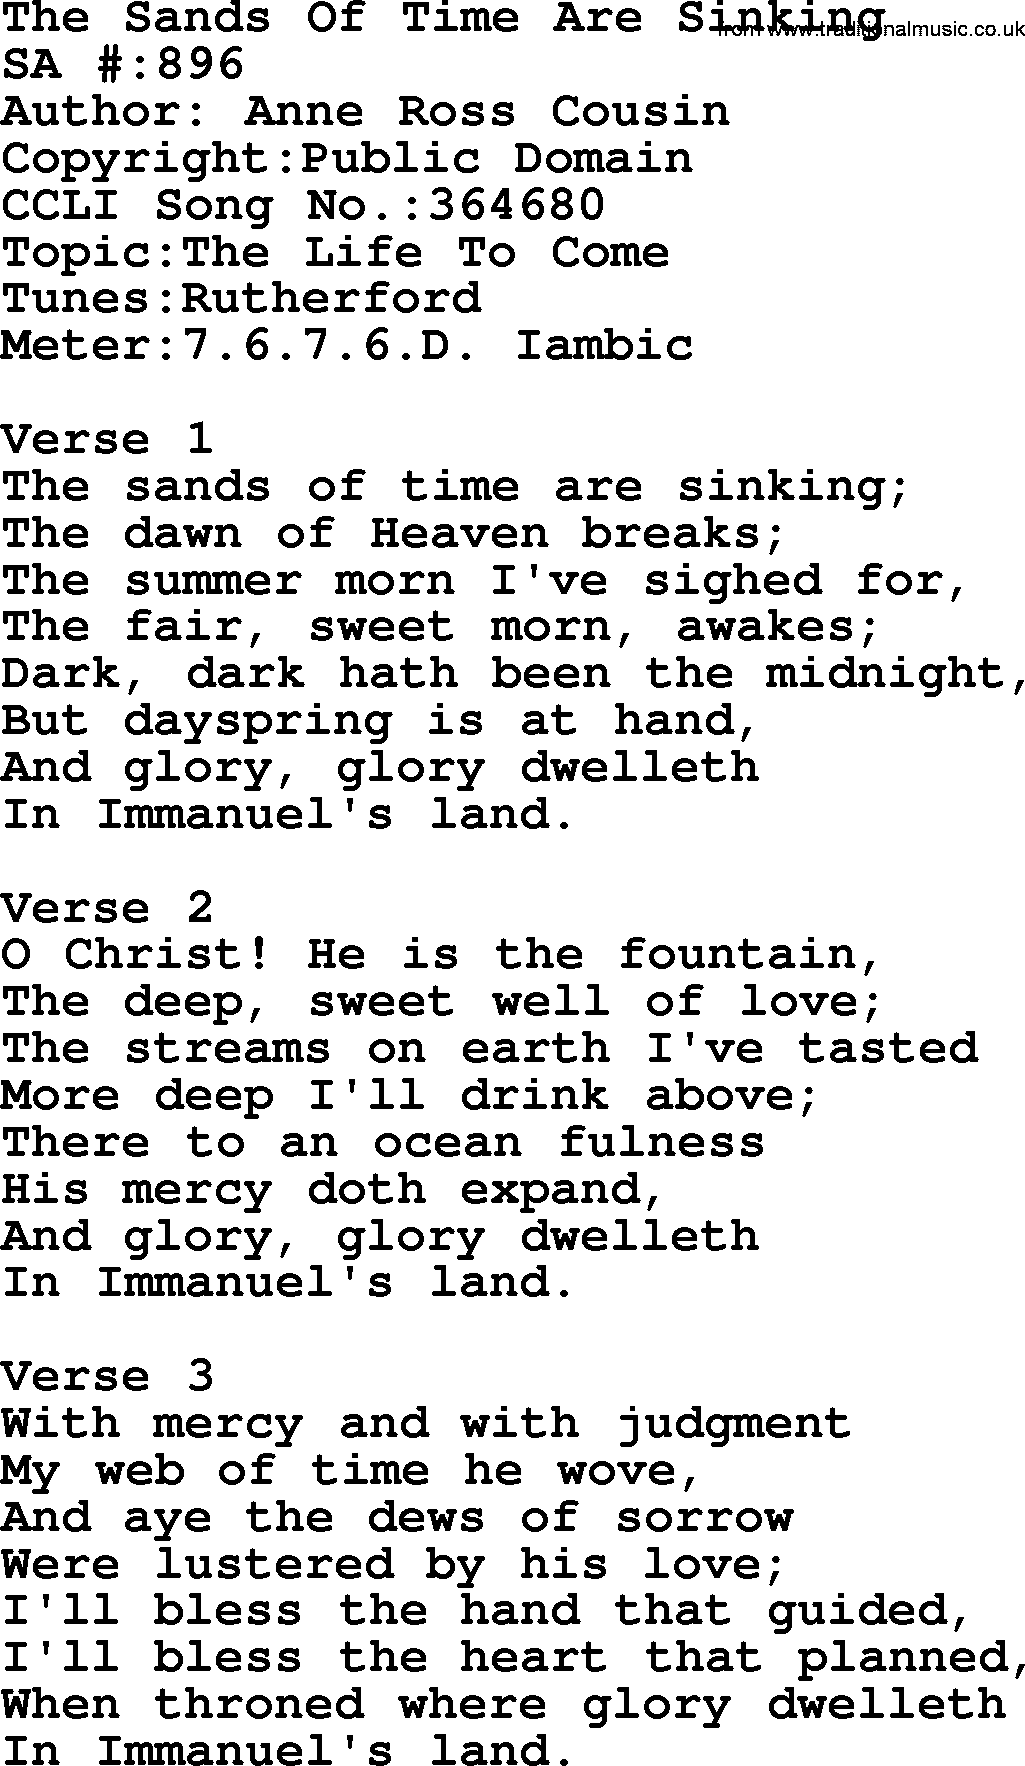 Salvation Army Hymnal, title: The Sands Of Time Are Sinking, with lyrics and PDF,